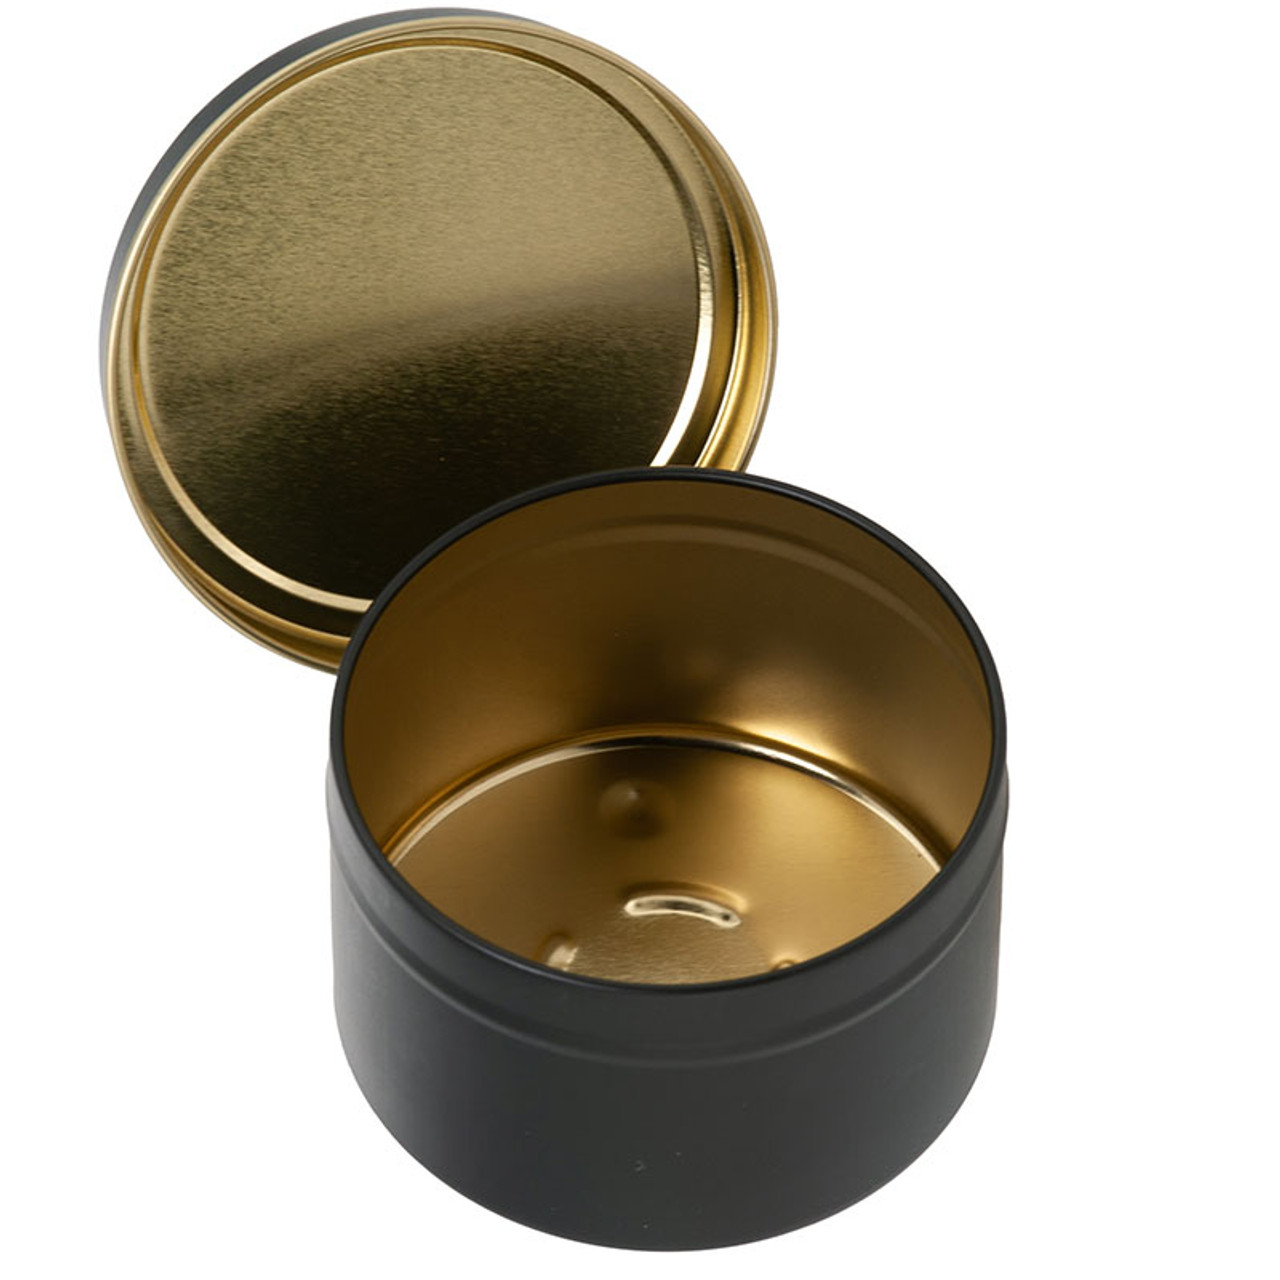 4 oz Black Candle Tin with Feet | 12 Pack | Jar Store